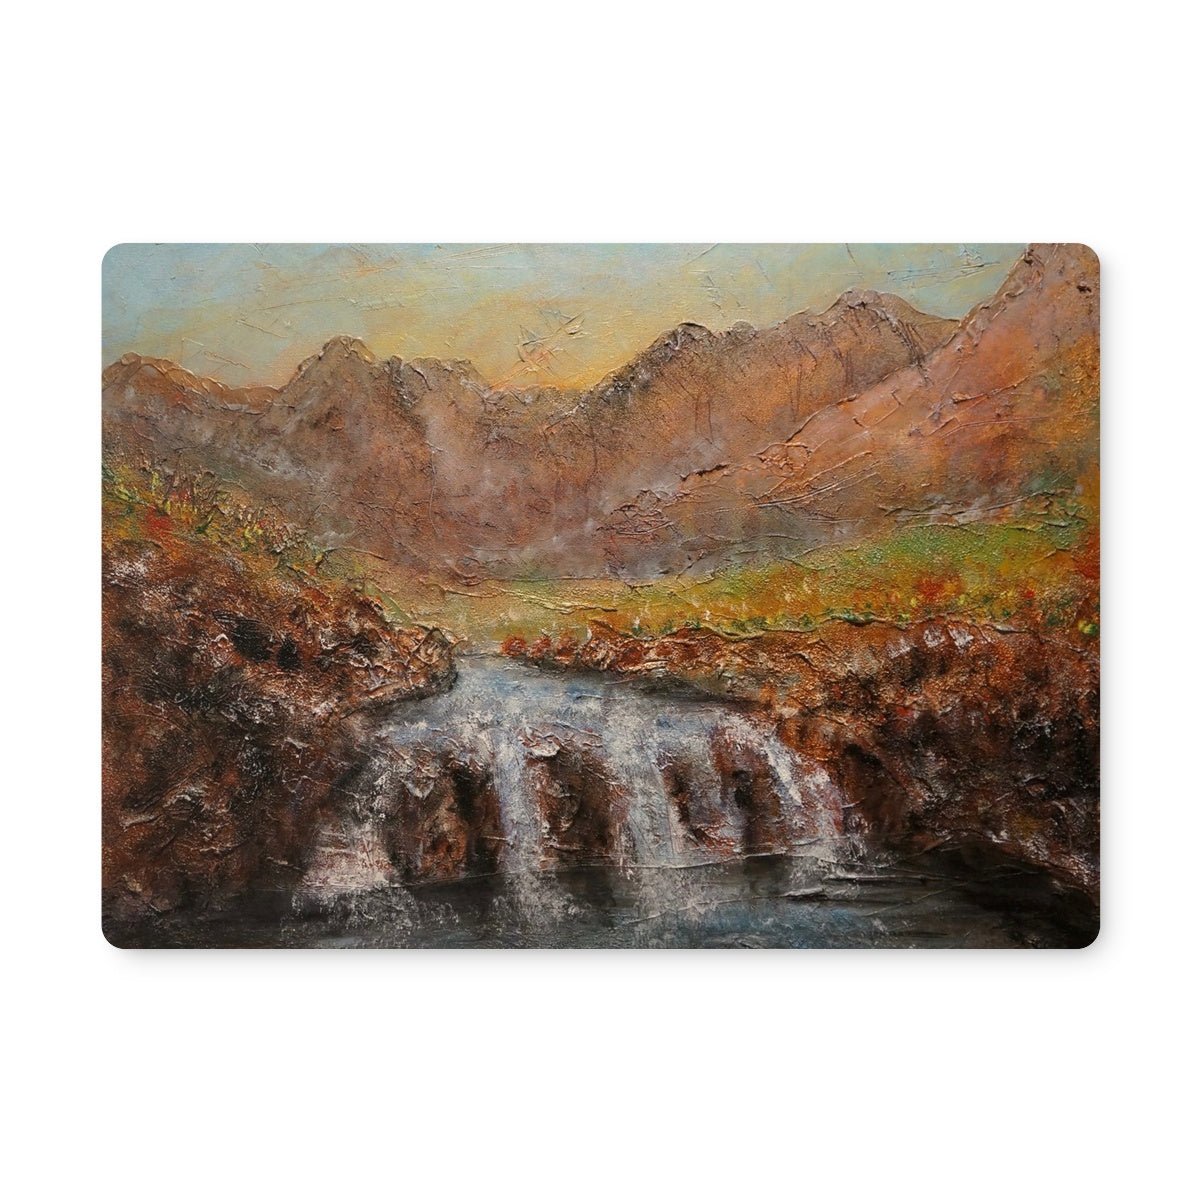 Fairy Pools Dawn Skye Art Gifts Placemat-Placemats-Skye Art Gallery-Single Placemat-Paintings, Prints, Homeware, Art Gifts From Scotland By Scottish Artist Kevin Hunter